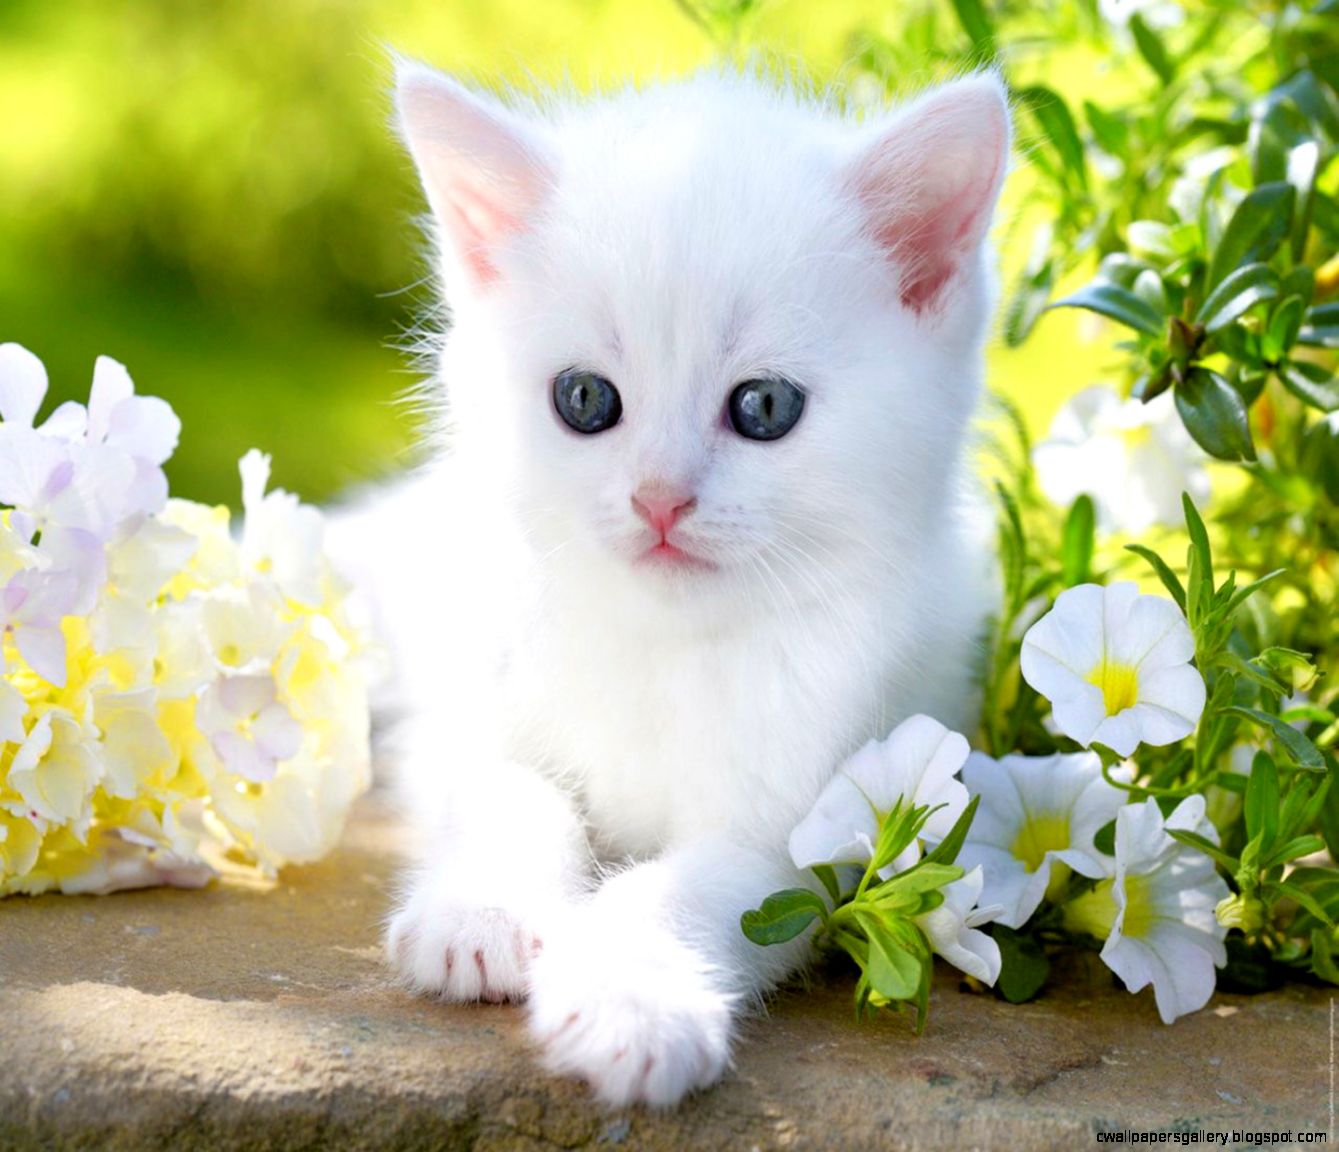 Cute White Cat Wallpaper | Wallpapers Gallery